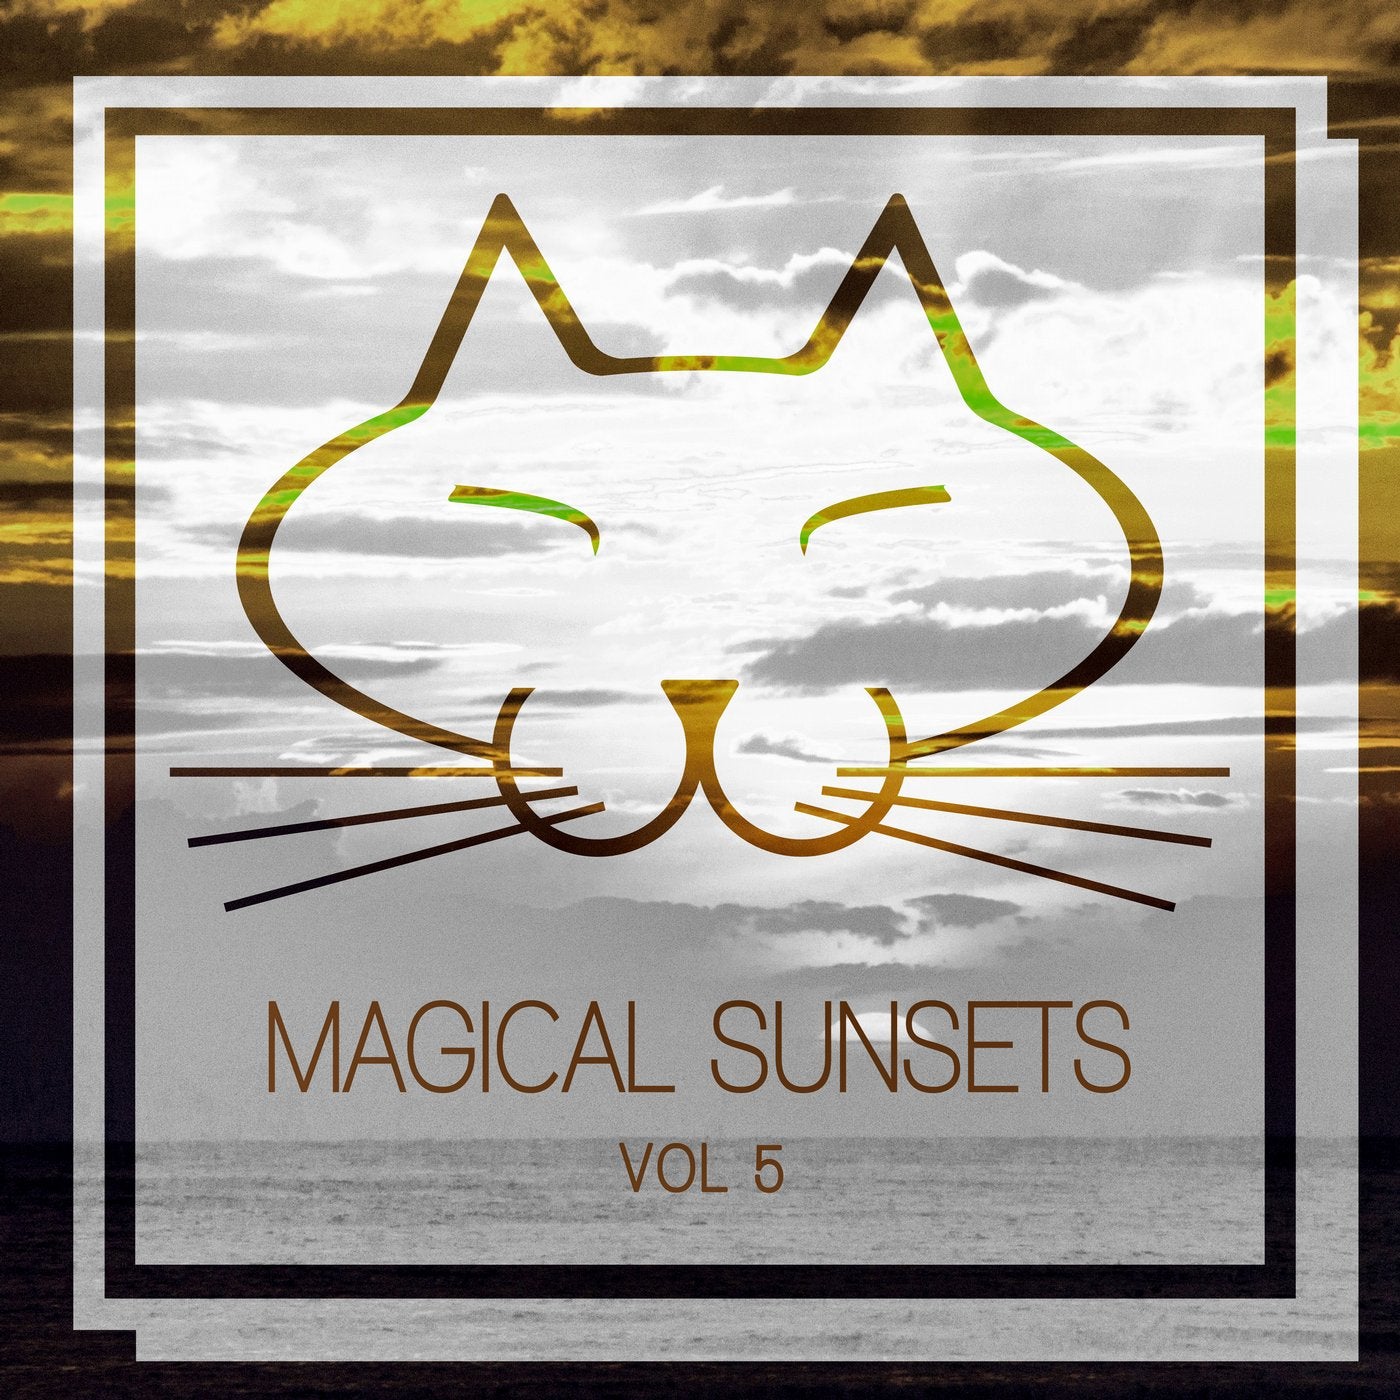 Magical Sunsets, Vol. 5